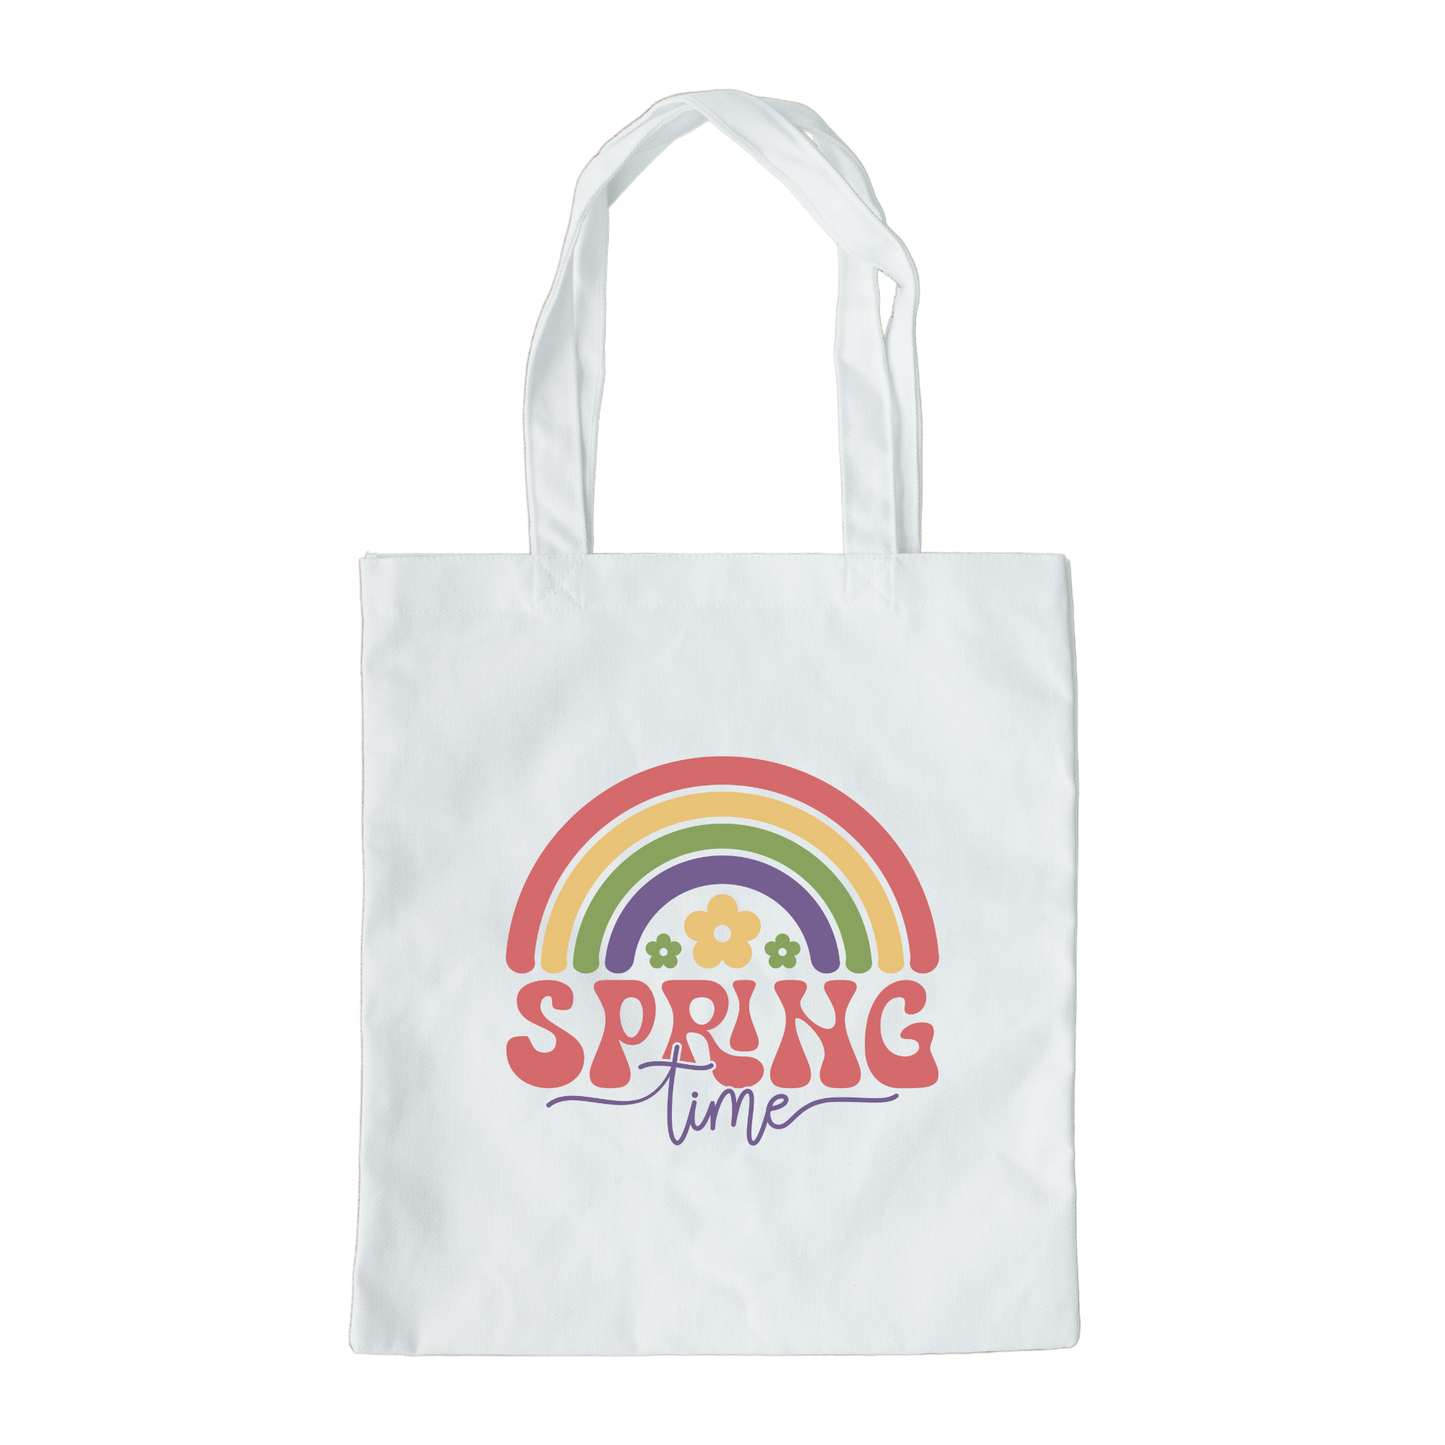 Spring Time Rainbow Tote Bag, Reusable Canvas Tote